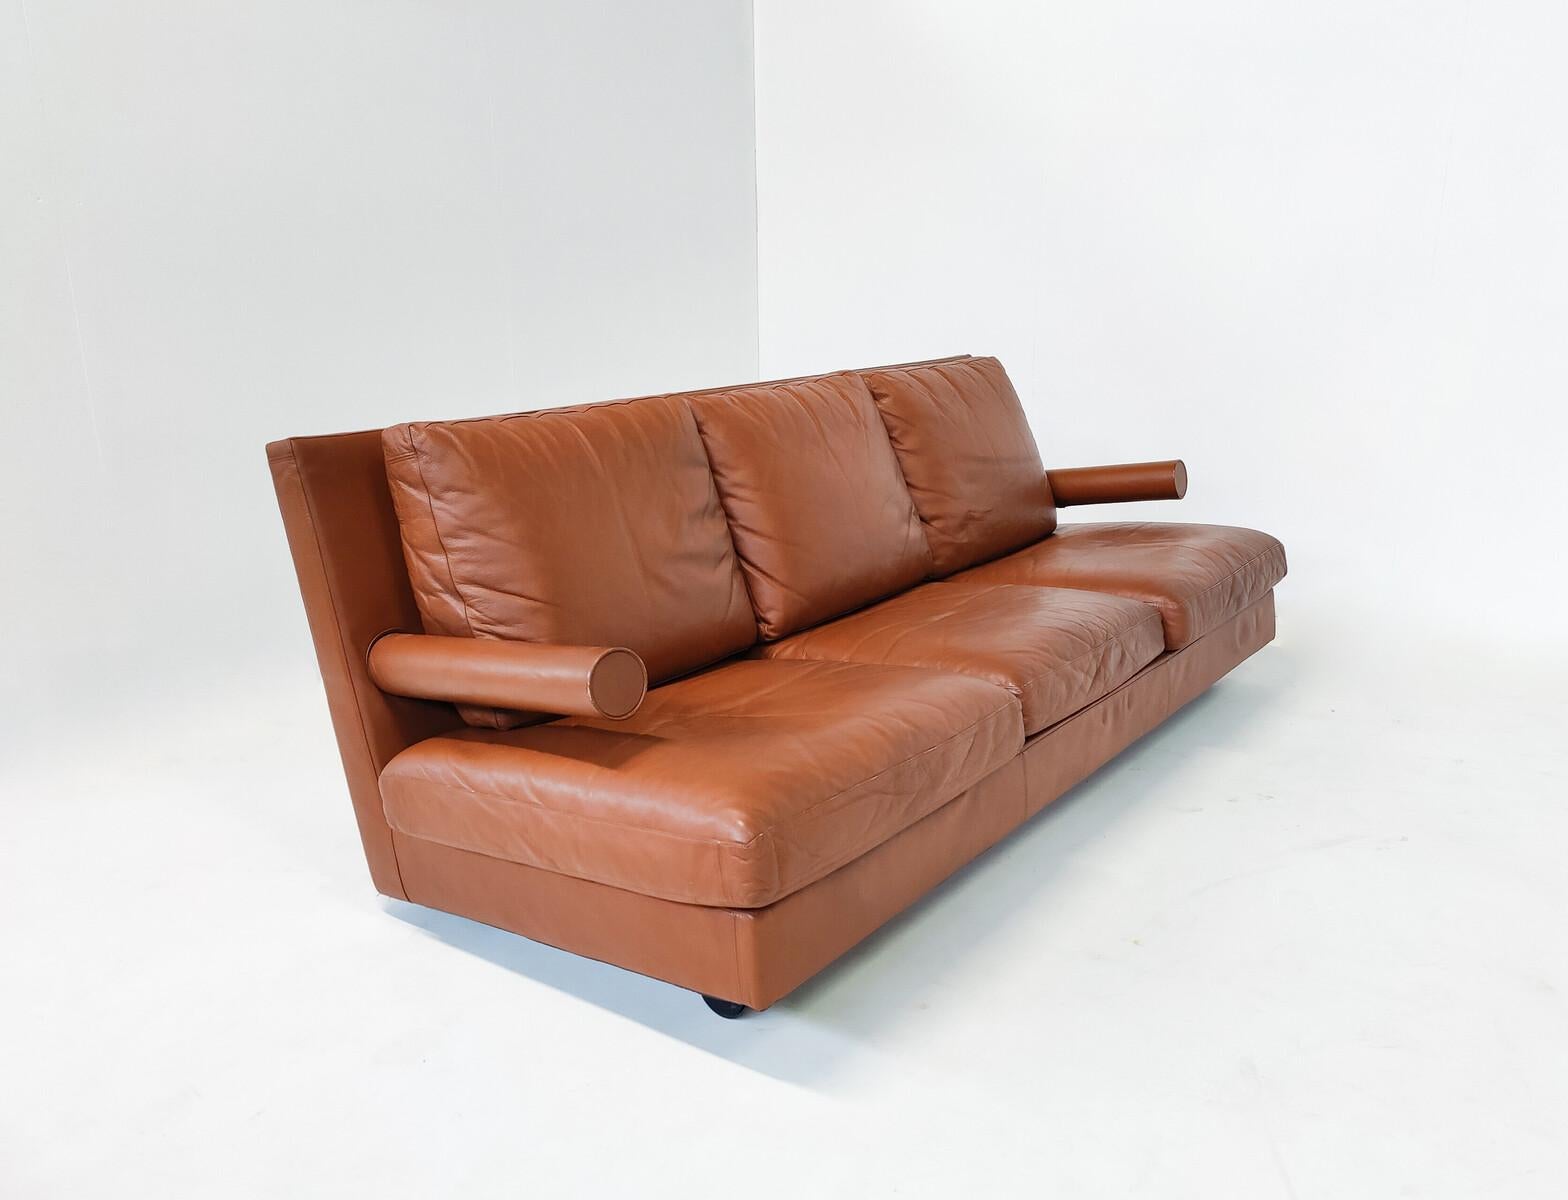 Mid-Century Modern Baisity Sofa by Antonio Citterio for B&B Italia, Cognac Leath In Good Condition For Sale In Brussels, BE